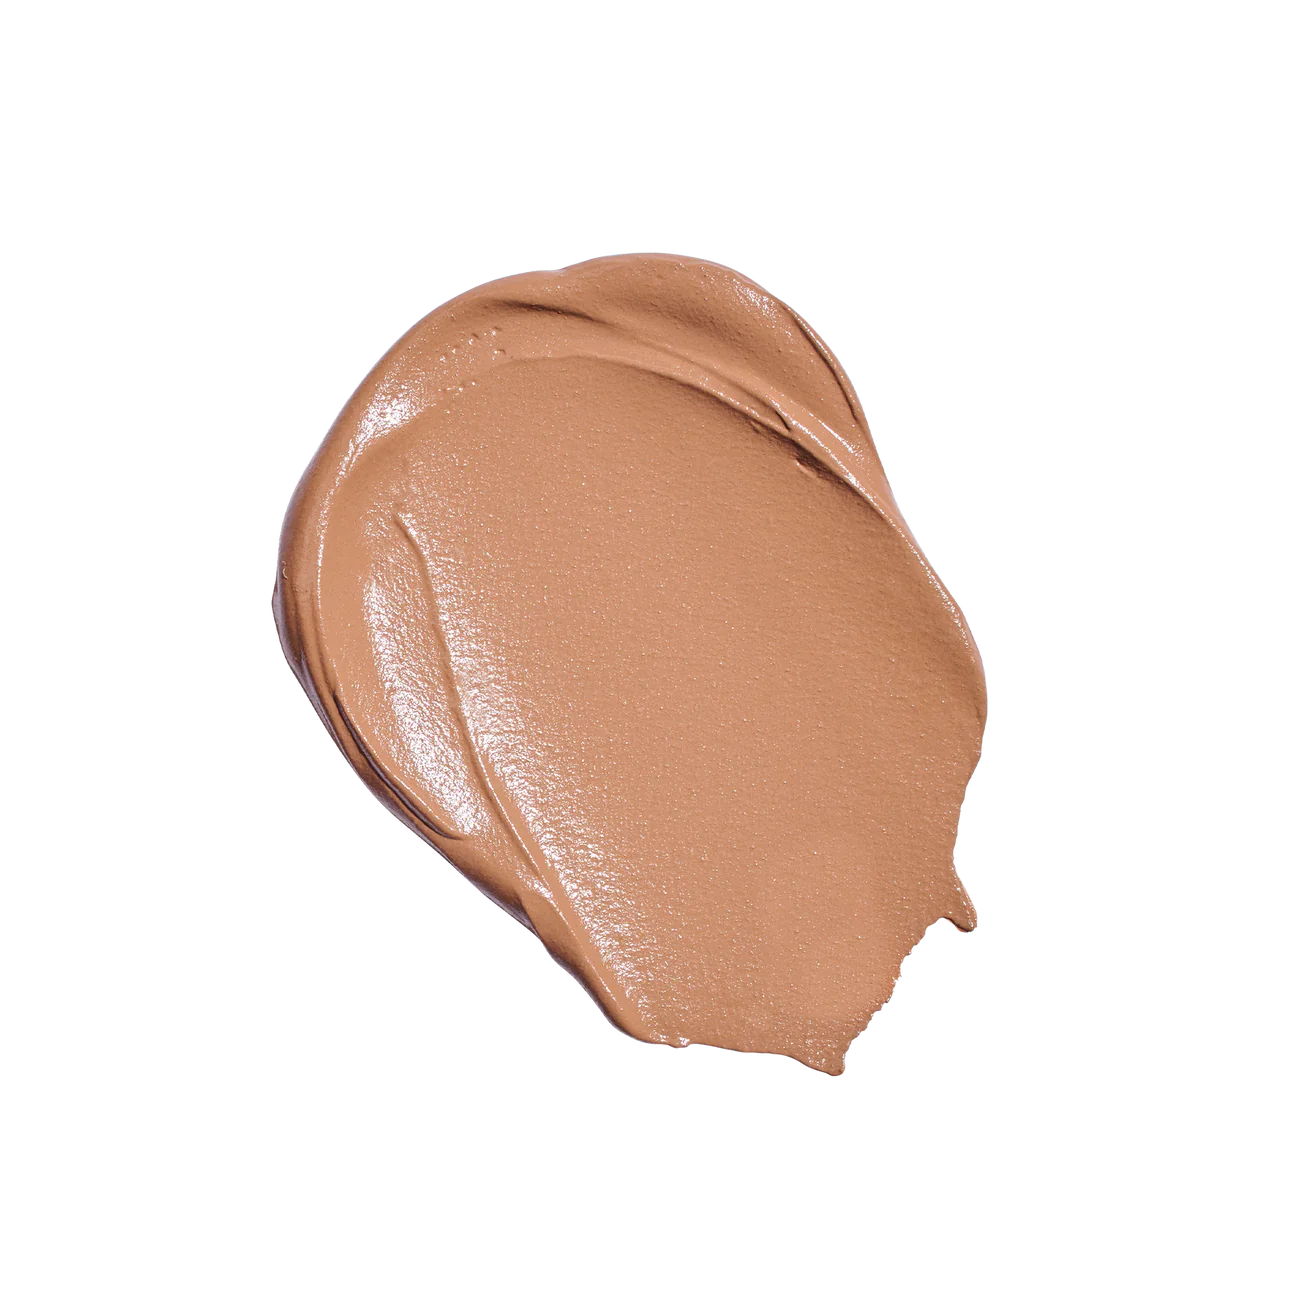 Colorescience Tint Du Soleil Whipped Mineral Foundation SPF 30 in Deep